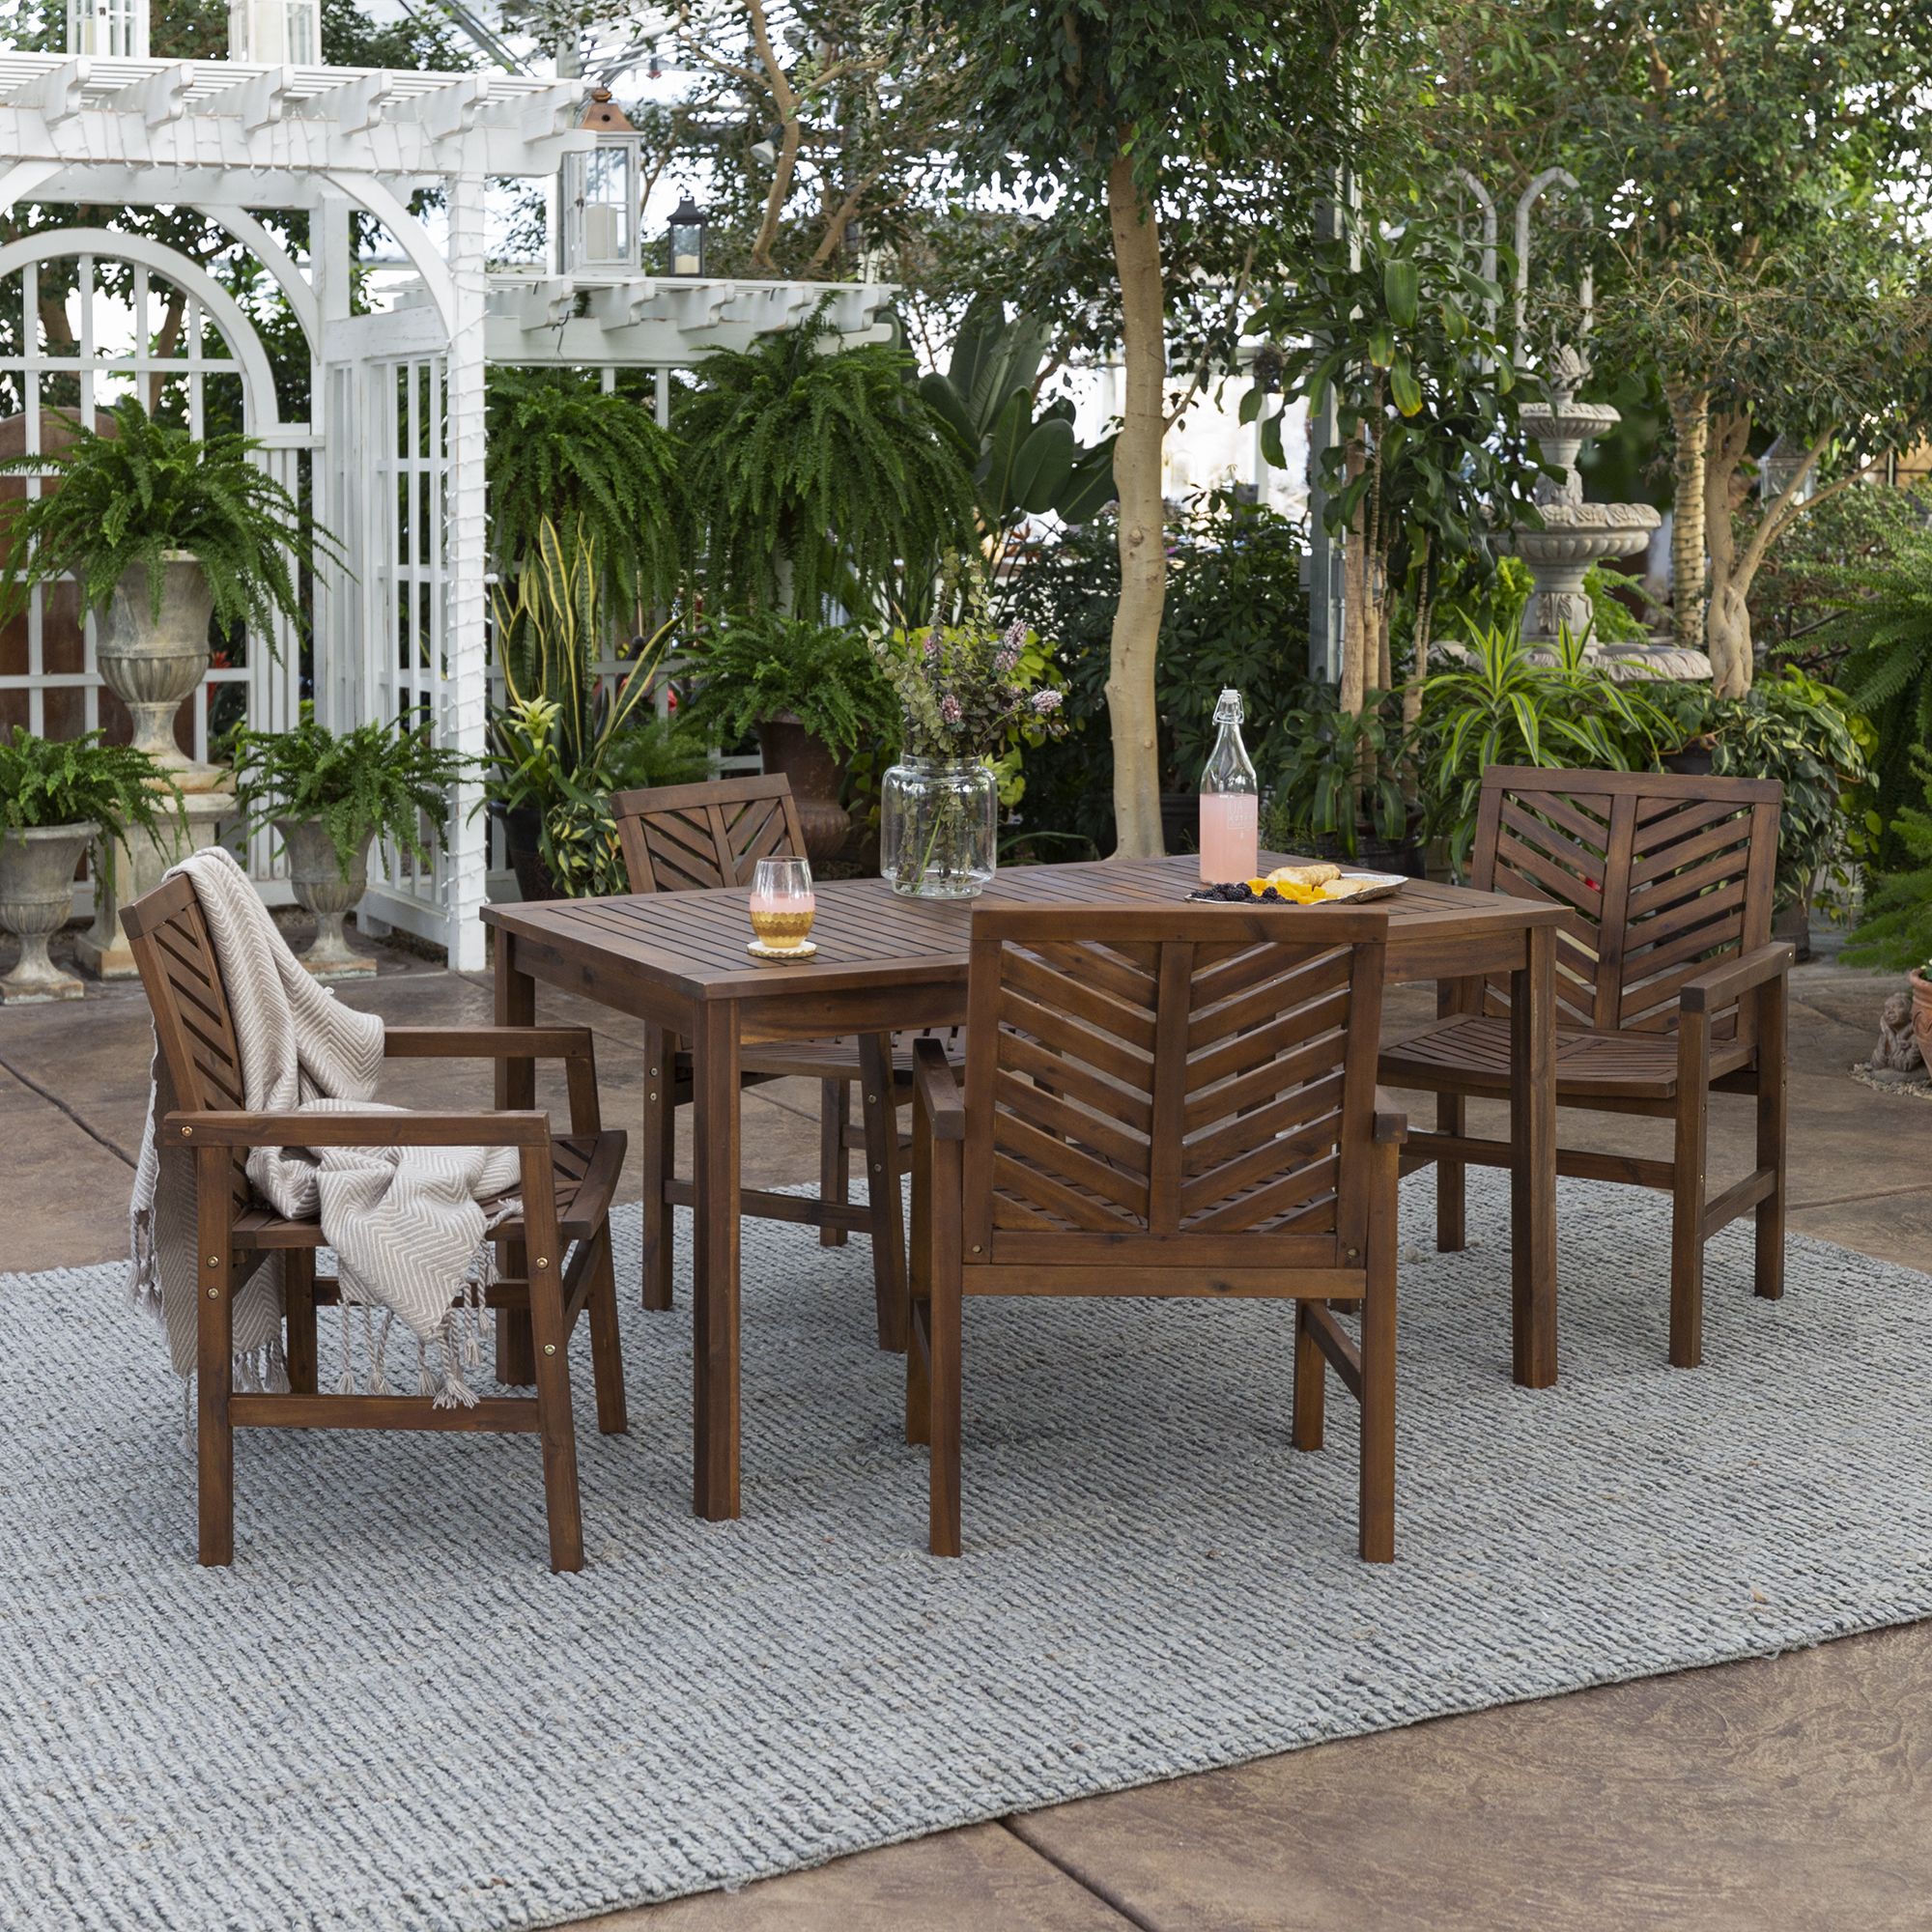 Most Recent Manor Park Outdoor Patio Dining Set, 5 Piece, Multiple Colors And Intended For 5 Piece Patio Dining Set (View 3 of 15)